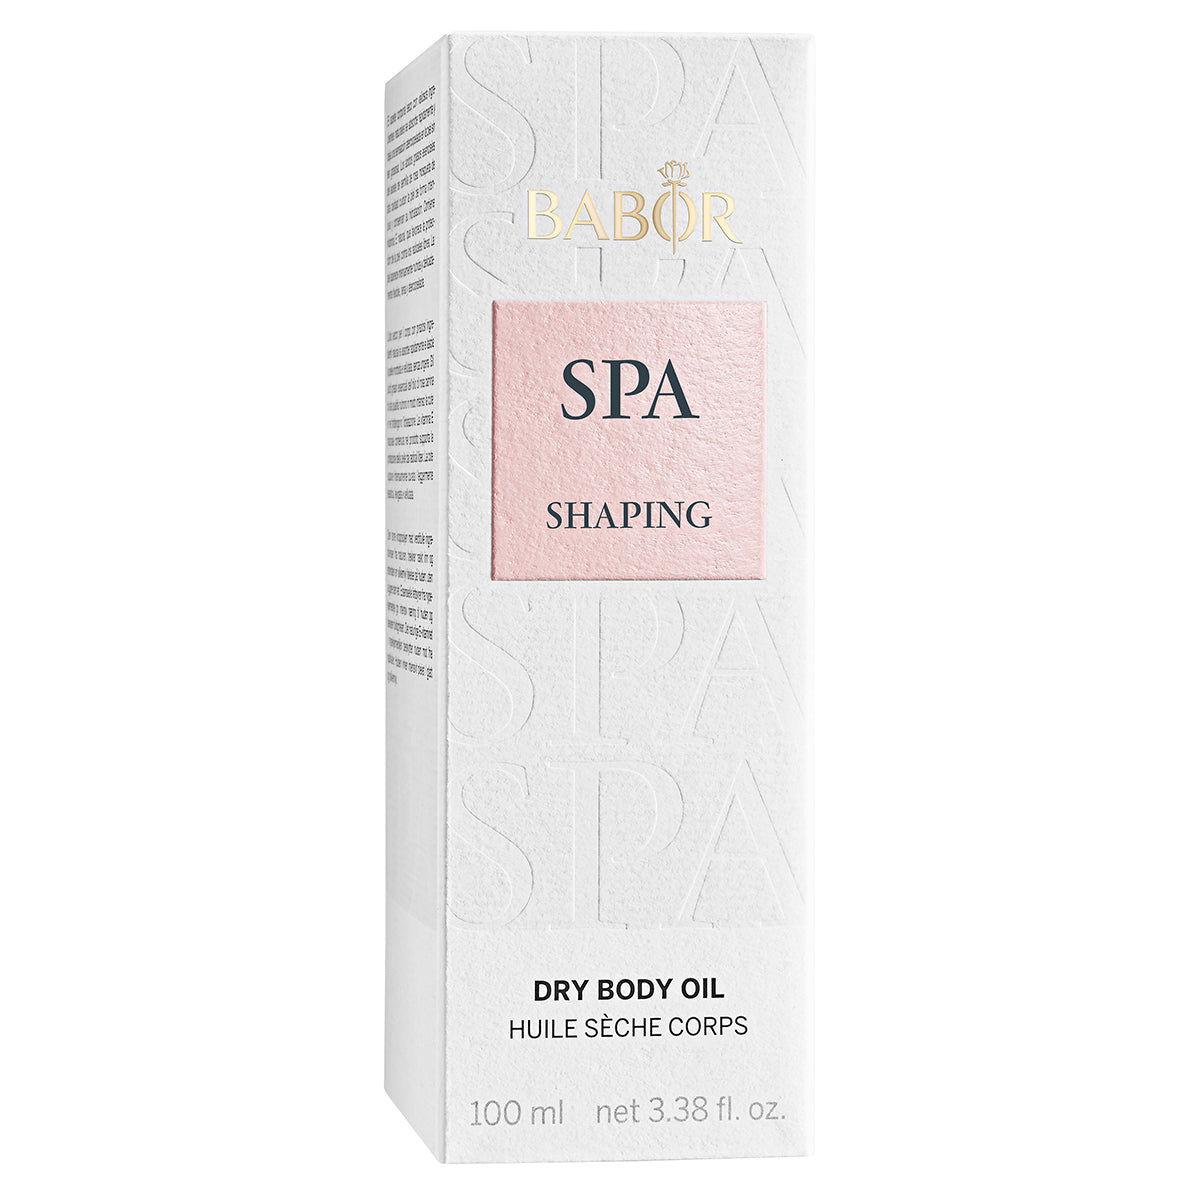 SPA Shaping Dry Body Oil 100ml